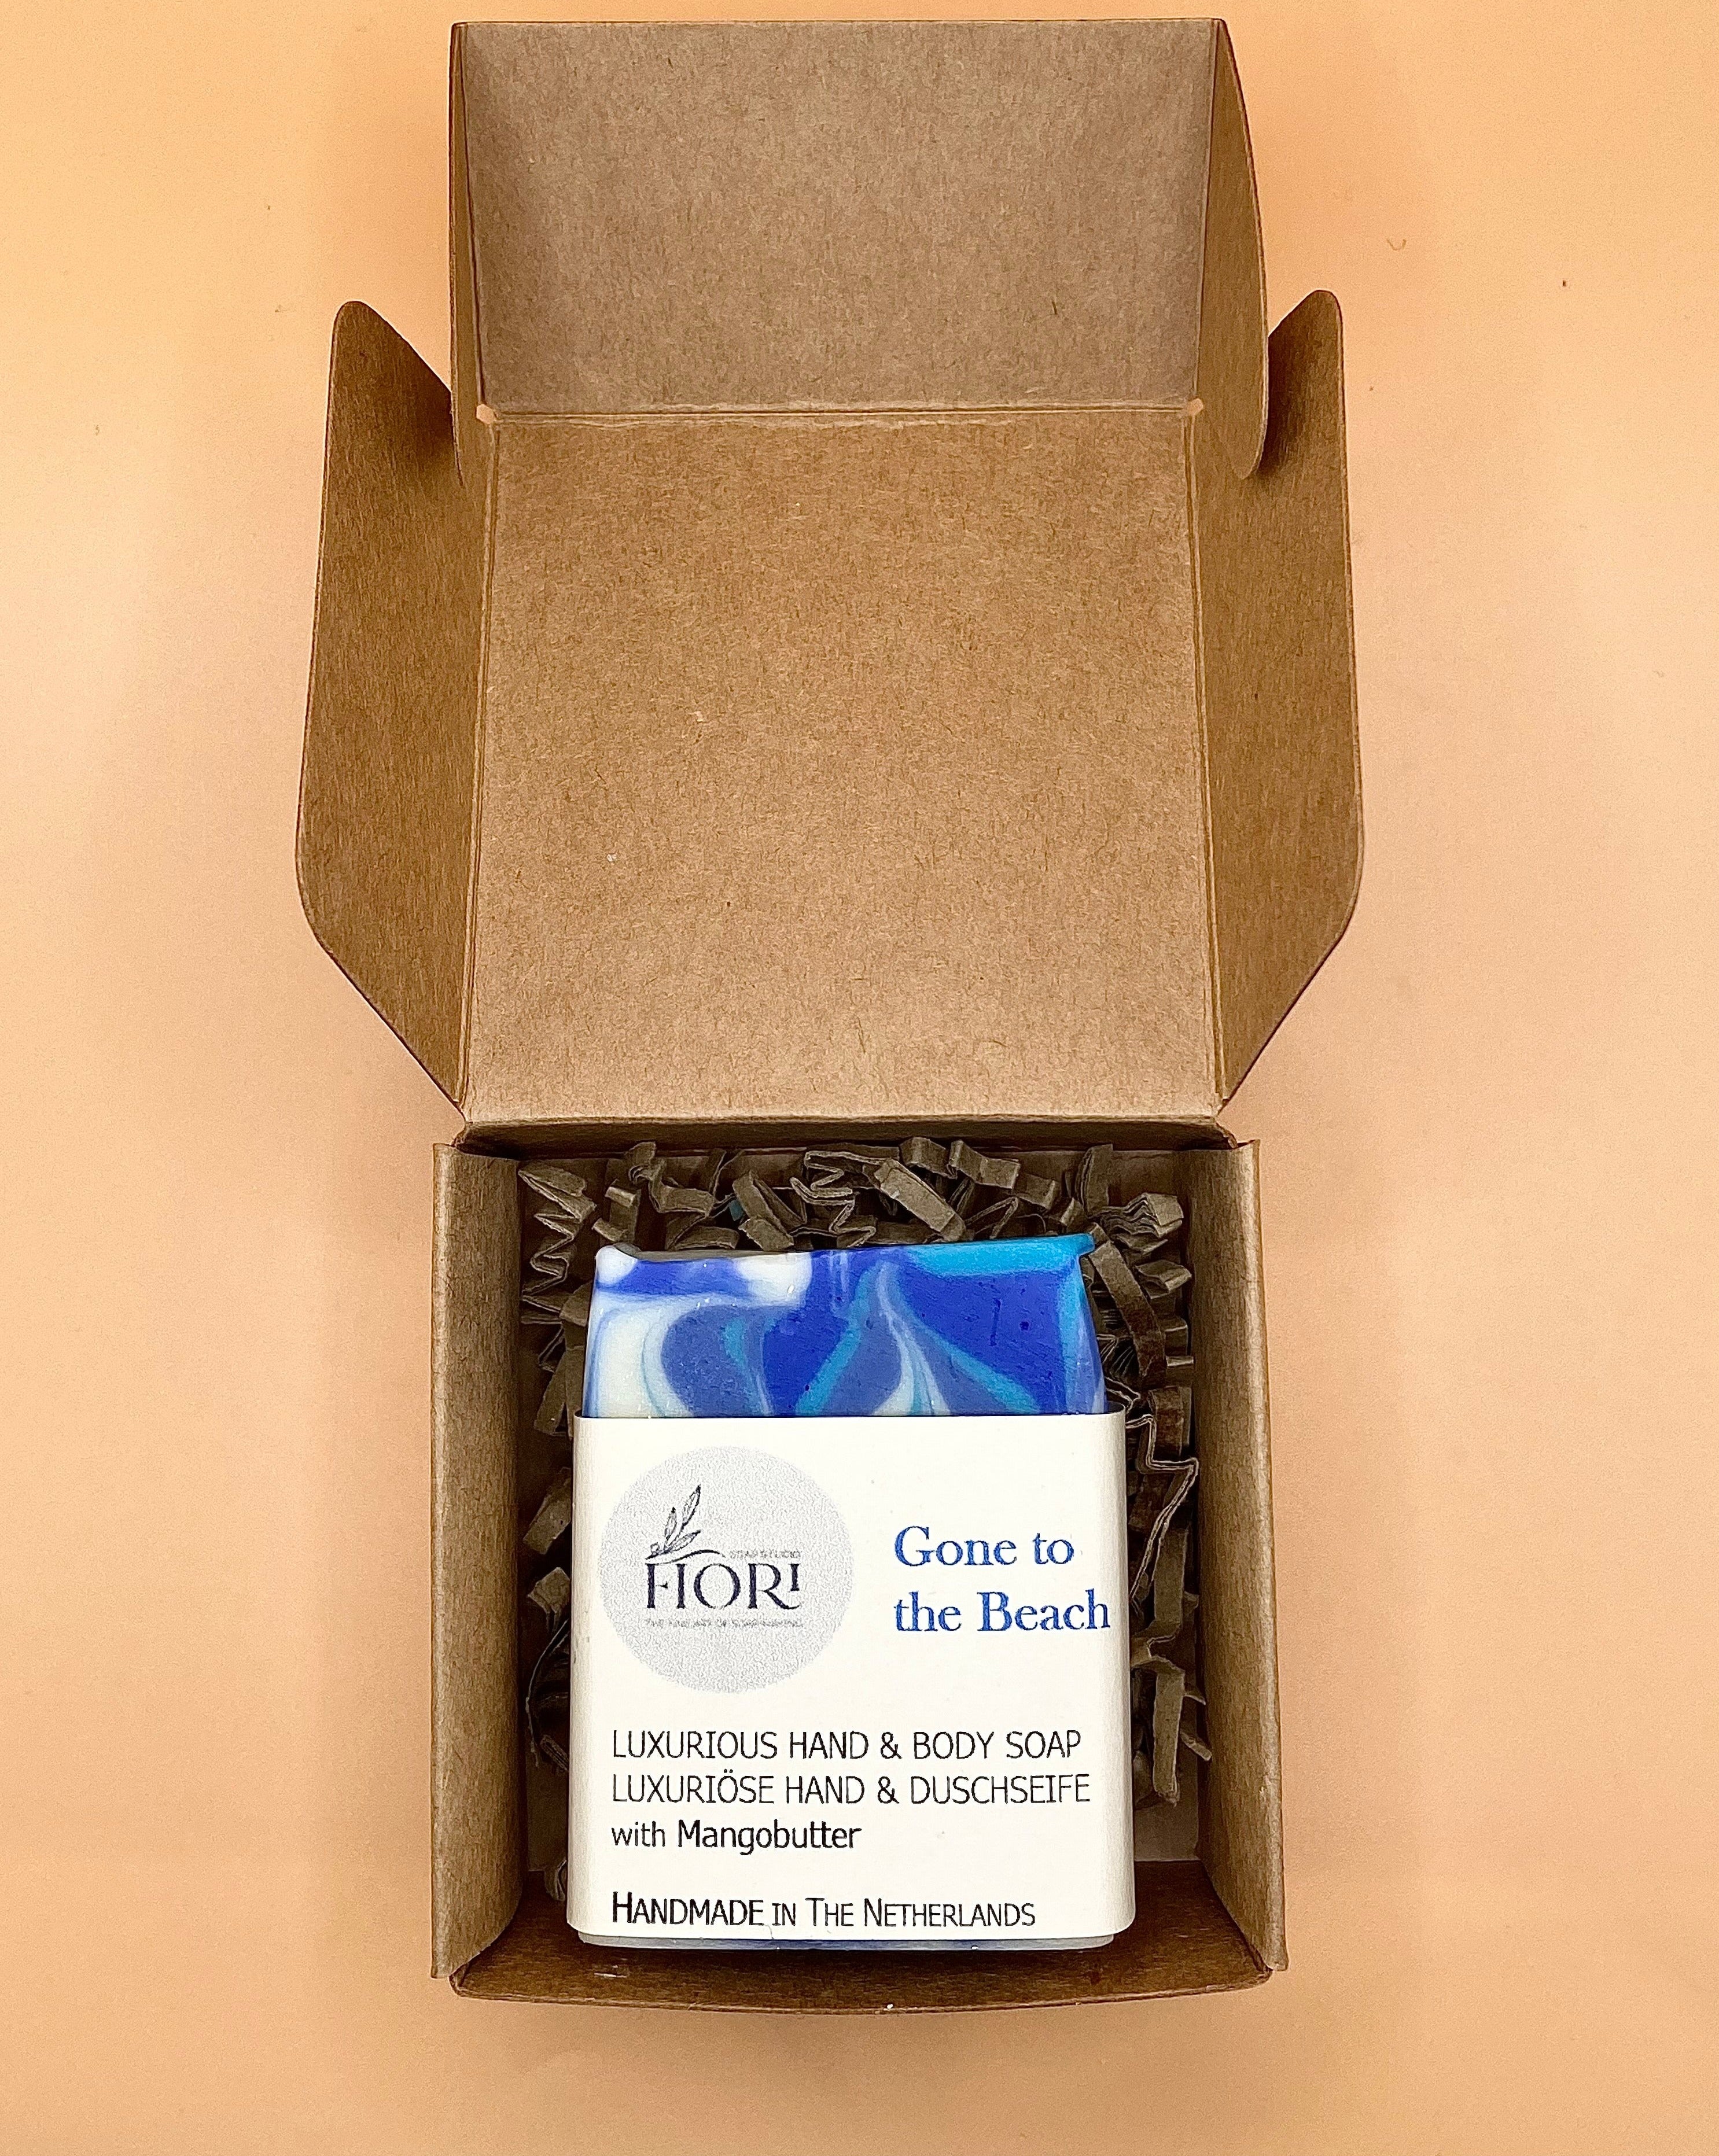 Handmade soap called "Gone to the beach"  is packaged in a Kraft paper box which is one of the 2 packaging options available for online orders. It is a handmade soap with only high quality ingredients. Very good for your skin and with a rich lather. Good for everyday use.